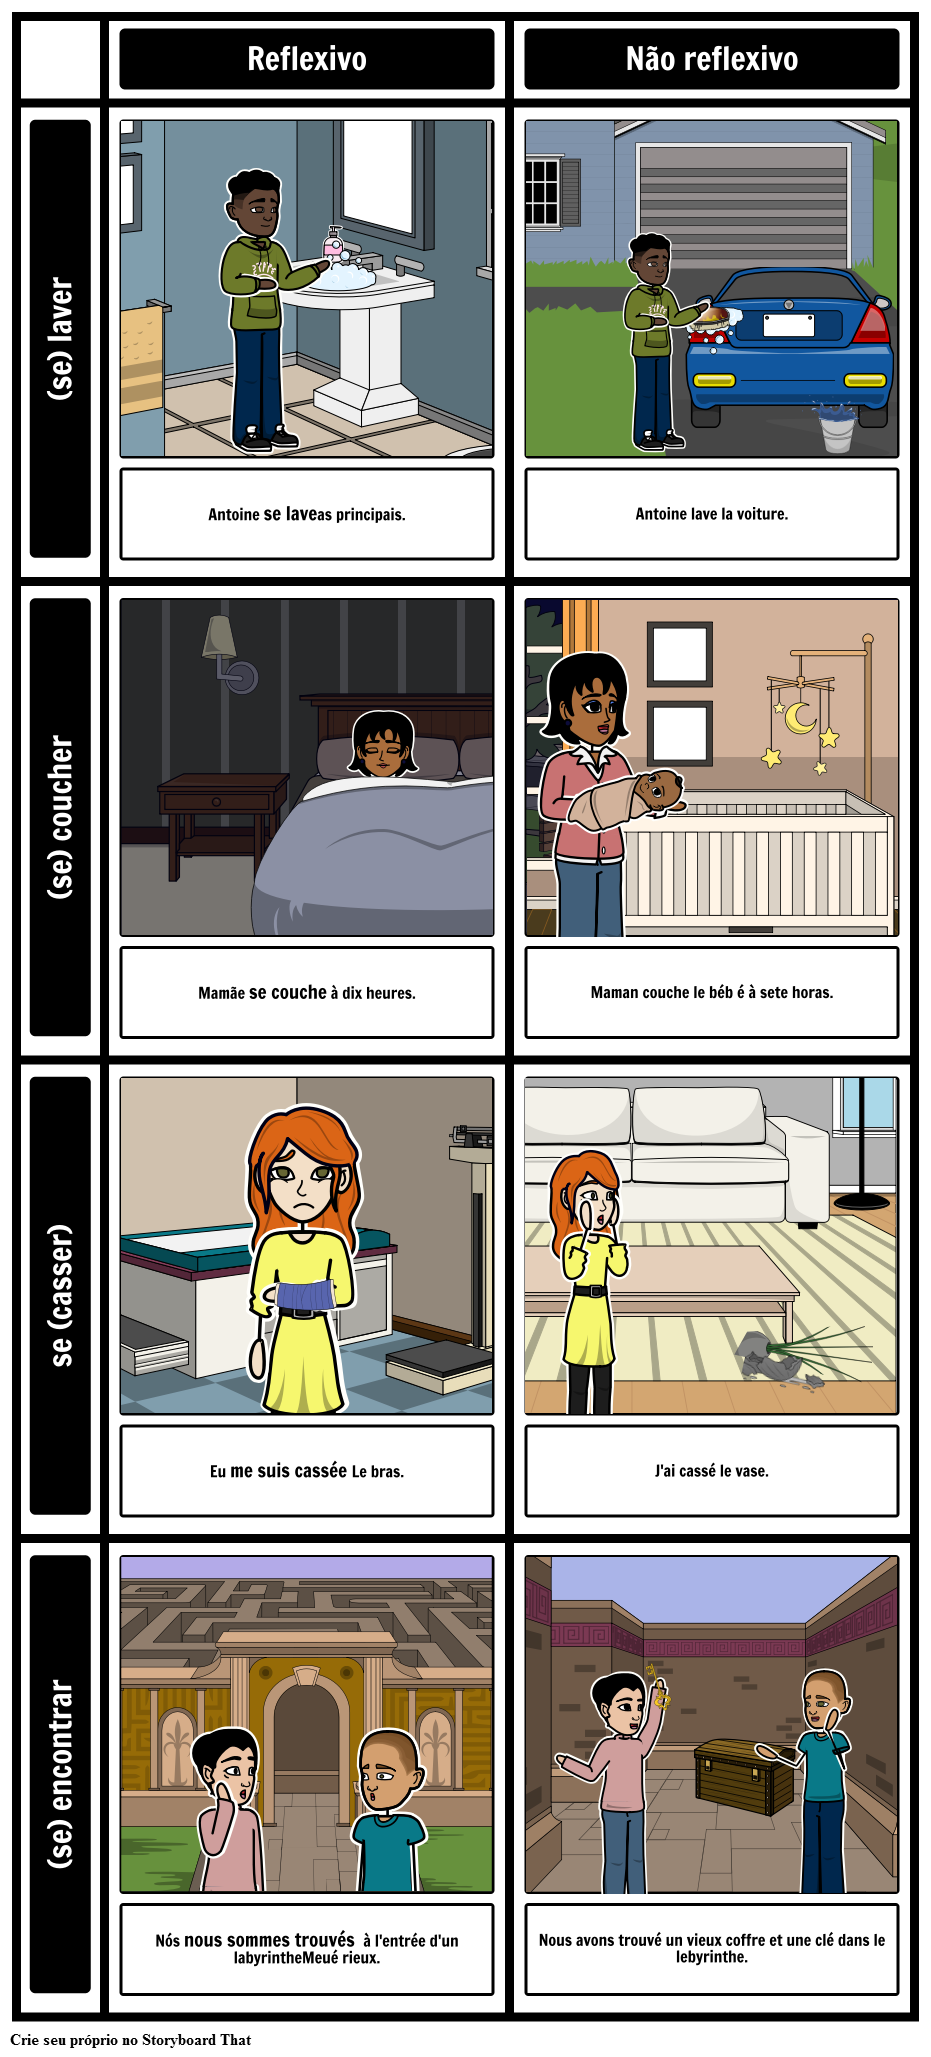 french-reflexive-verbs-storyboard-by-pt-examples